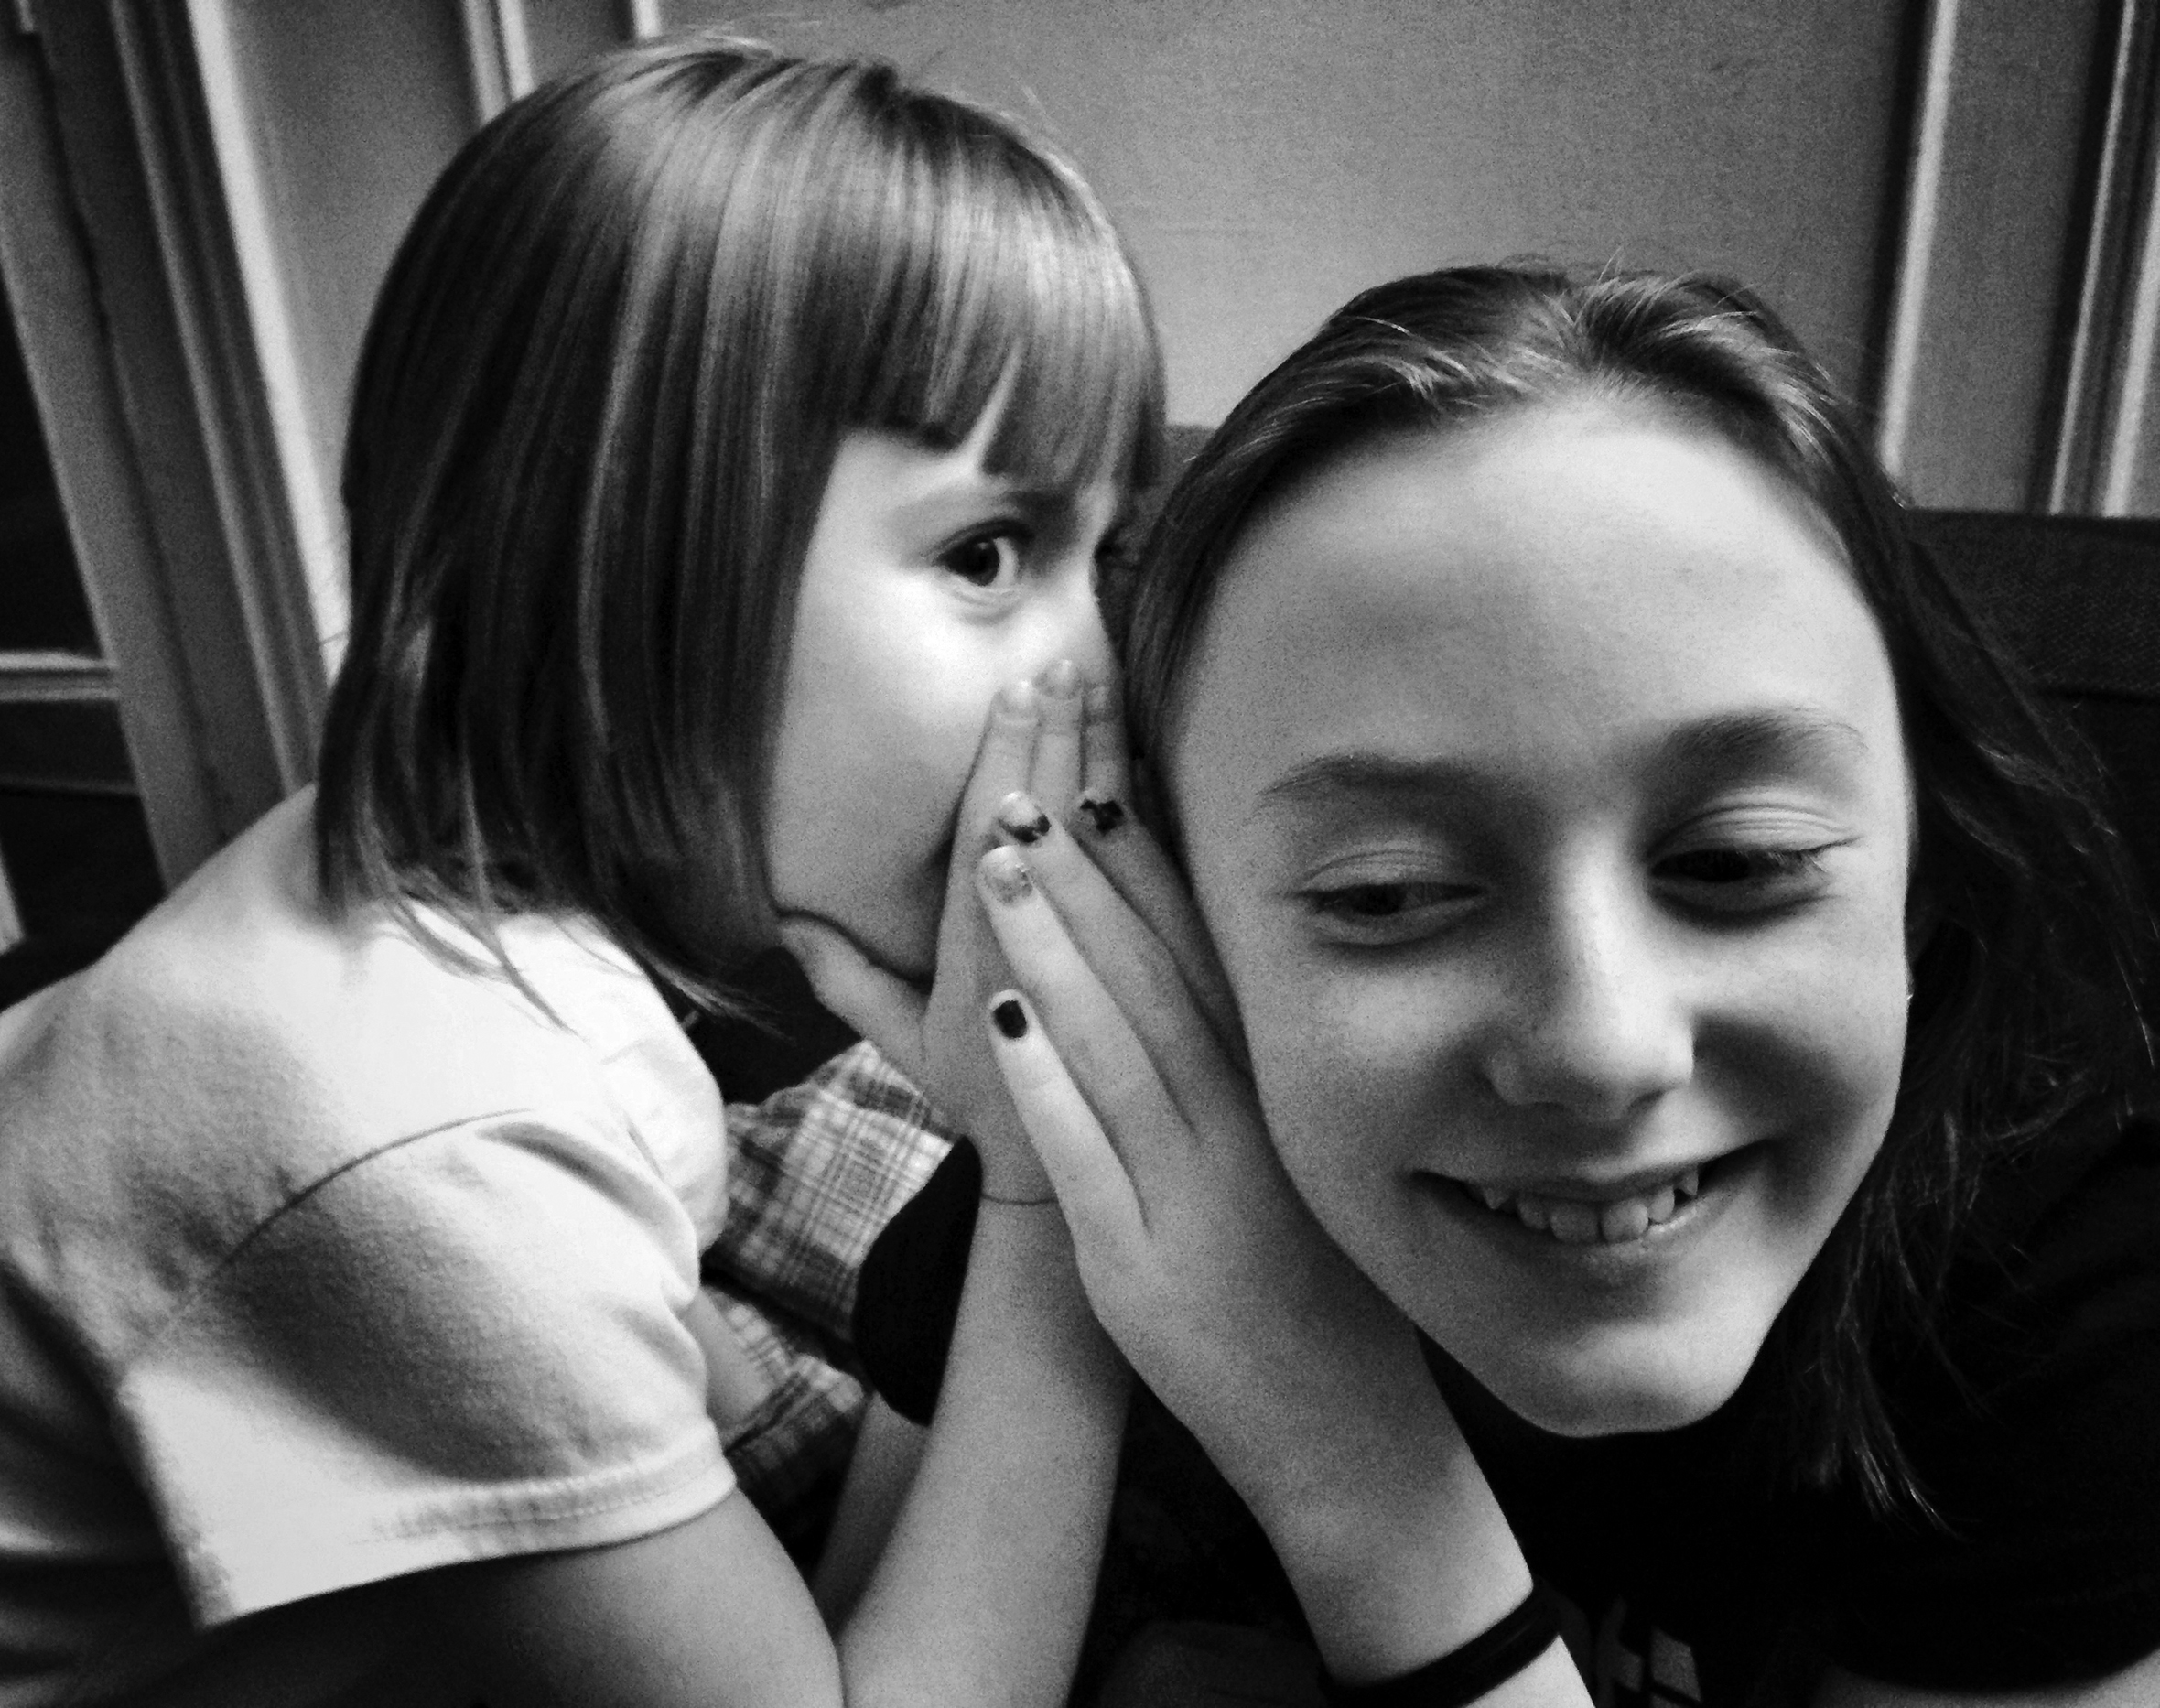 A young girl whispers in a teen girl’s ear. The teen girl listens closely and smiles.